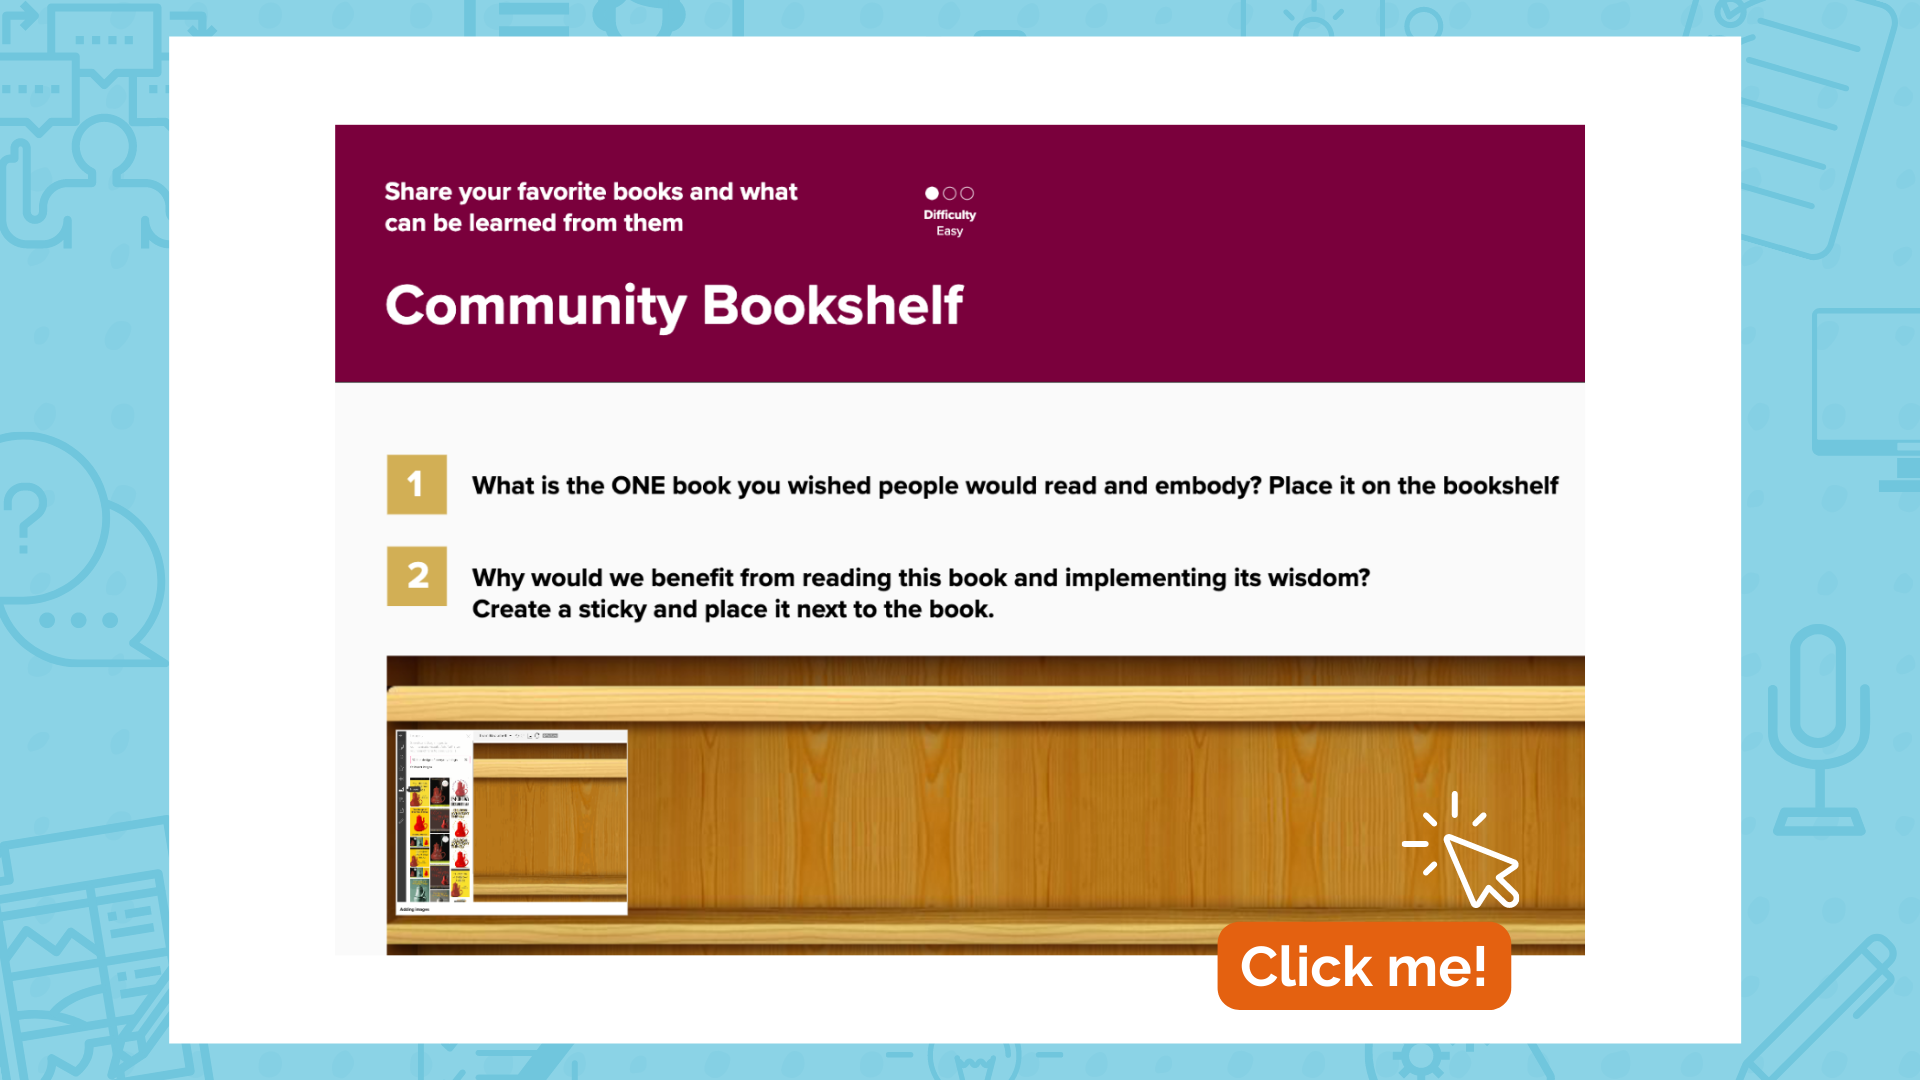 Click this image to open a MURAL board in a new tab, called Community Bookshelf